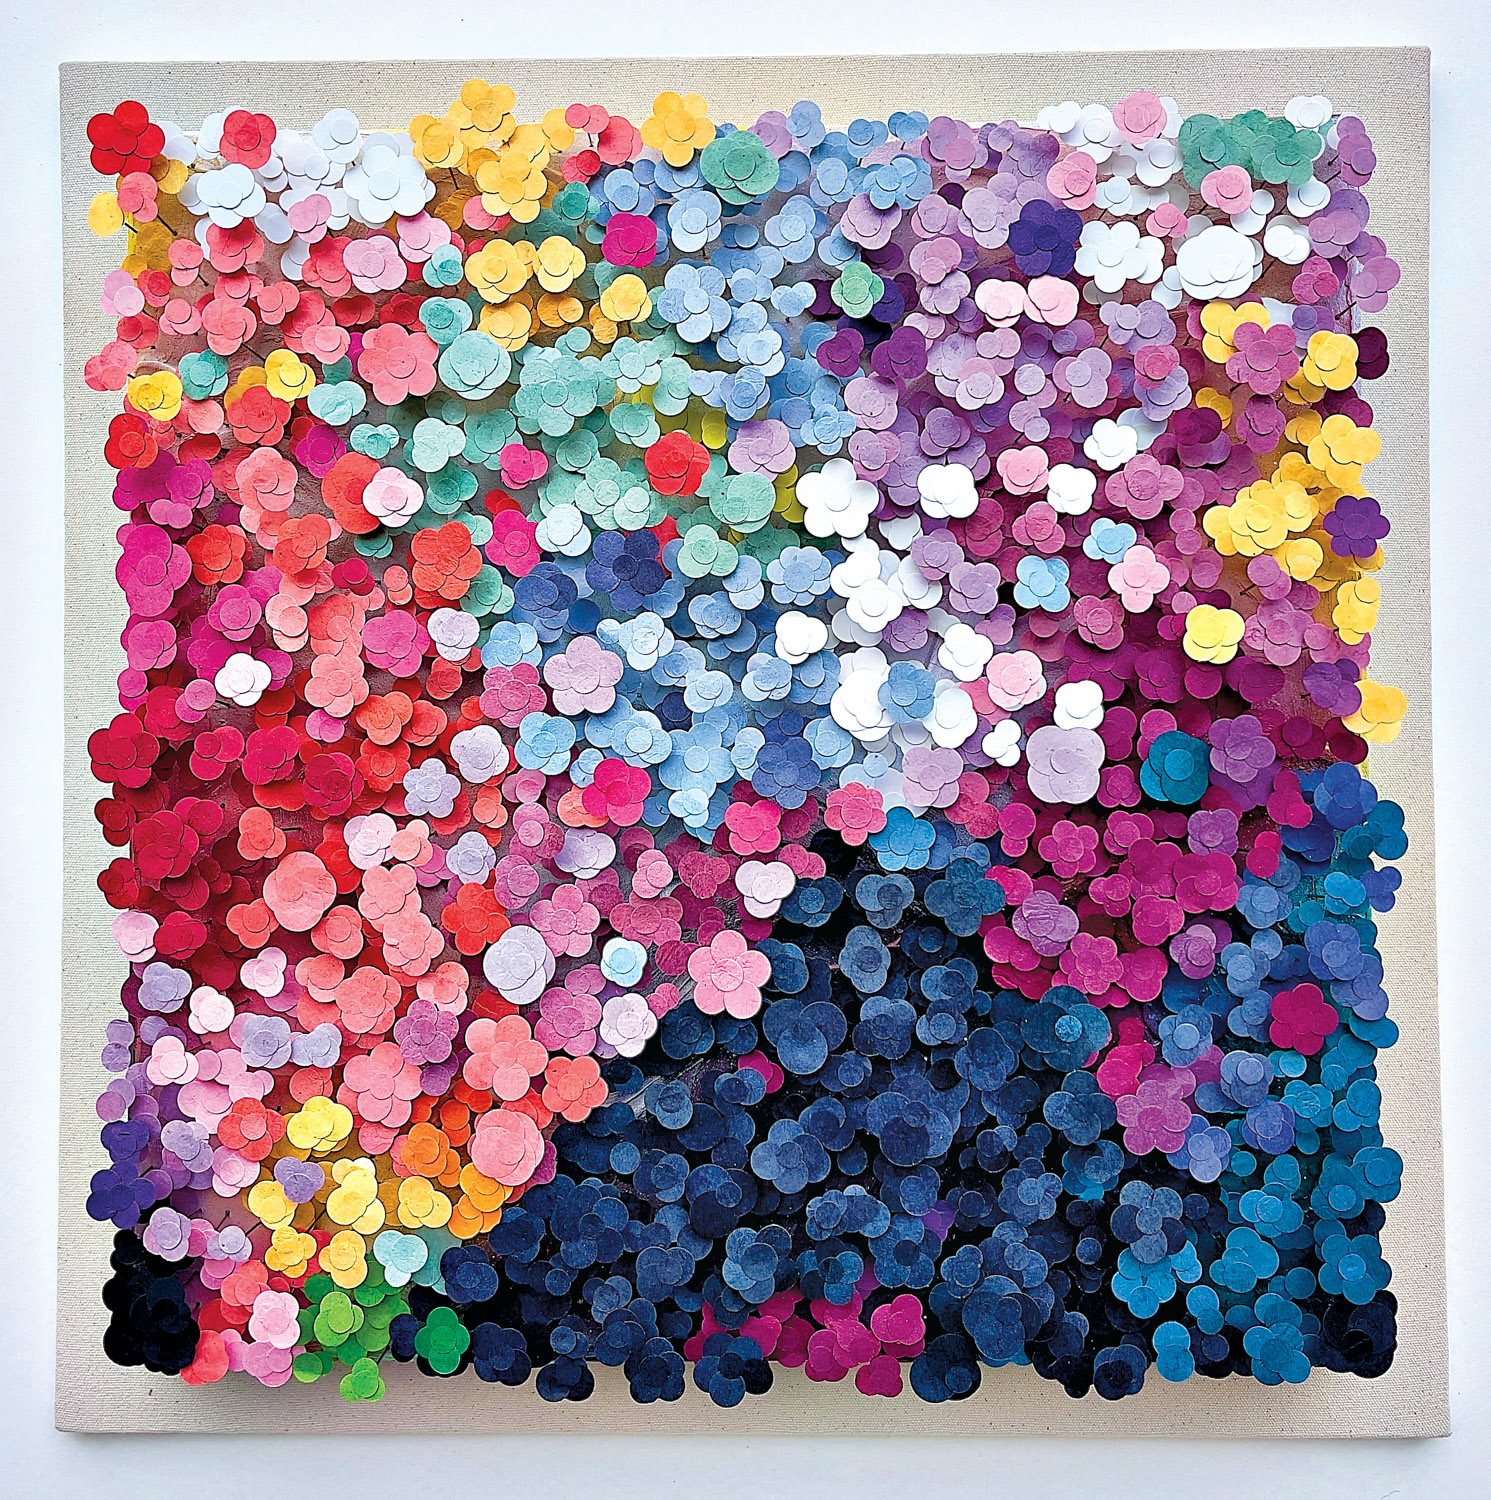 Large sculptural artwork of colorful layered hand-painted and hand-sculpted flowers